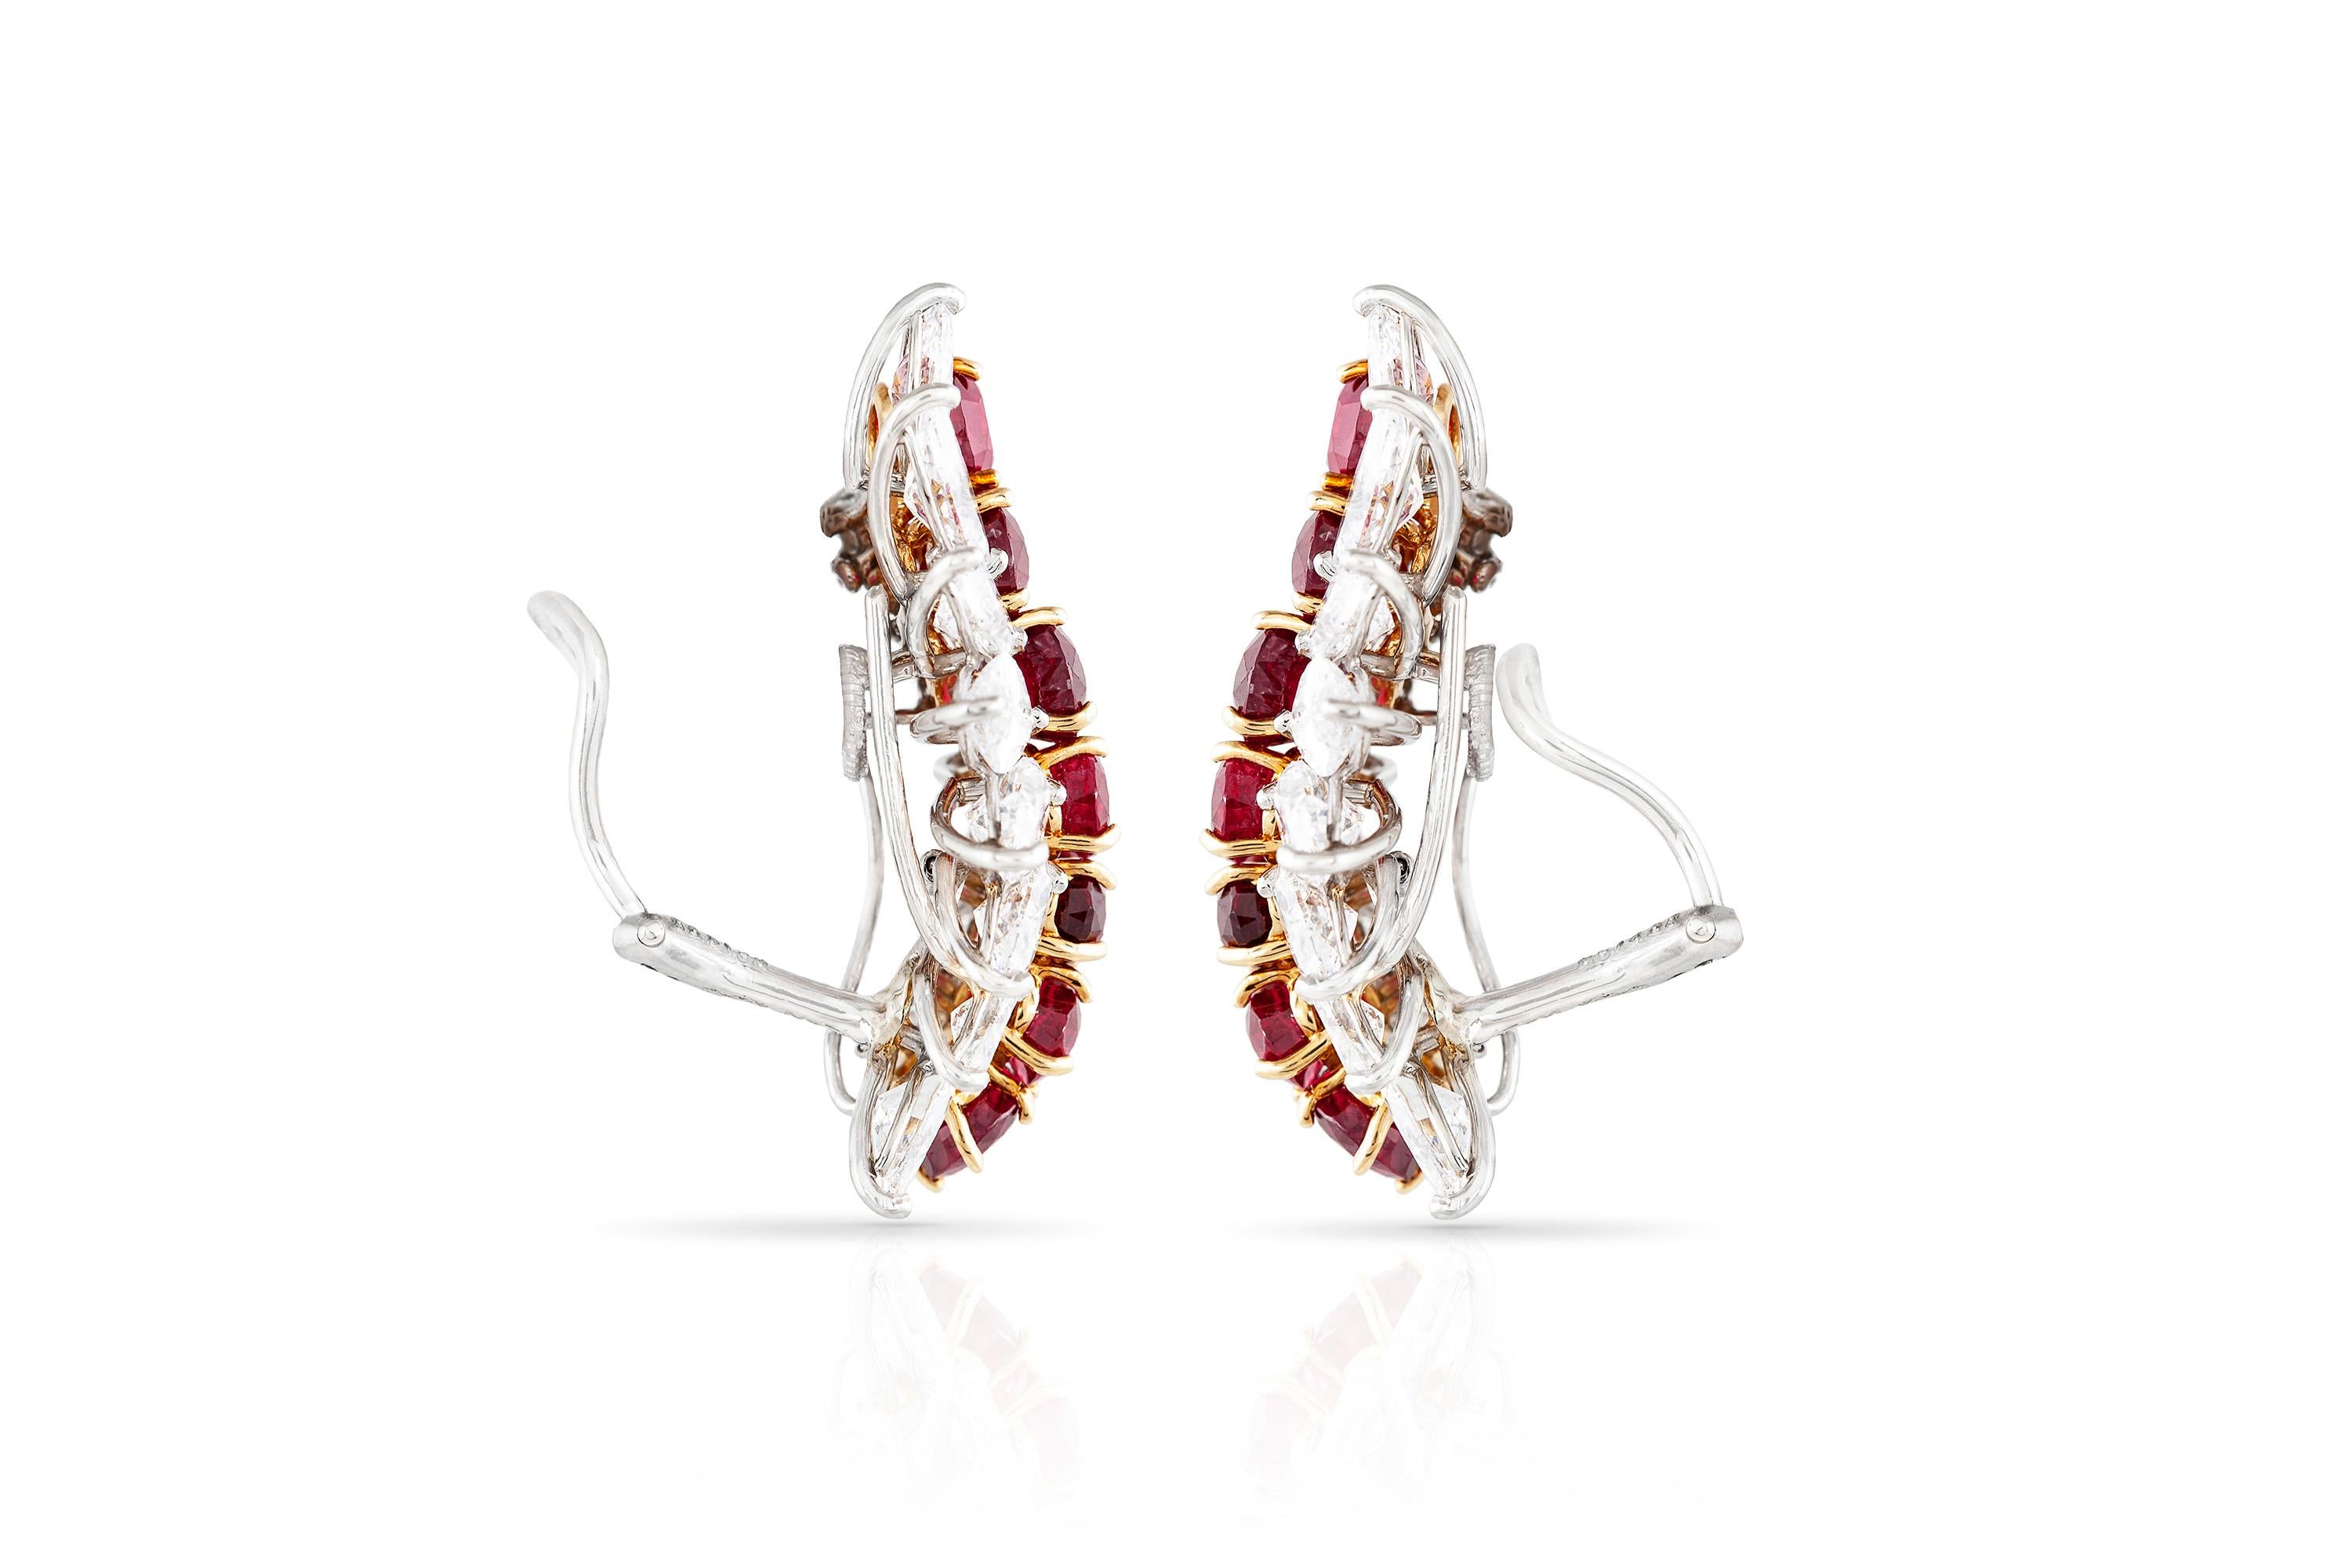 Cluster ear clip earrings, finely crafted in platinum and 18 k yellow gold, featuring 14 Burmese rubies, weighing a total of 12.46 carats, surrounded by brilliant and marquise cut diamonds, weighing a total of 11.11 carats. Signed and numbered by